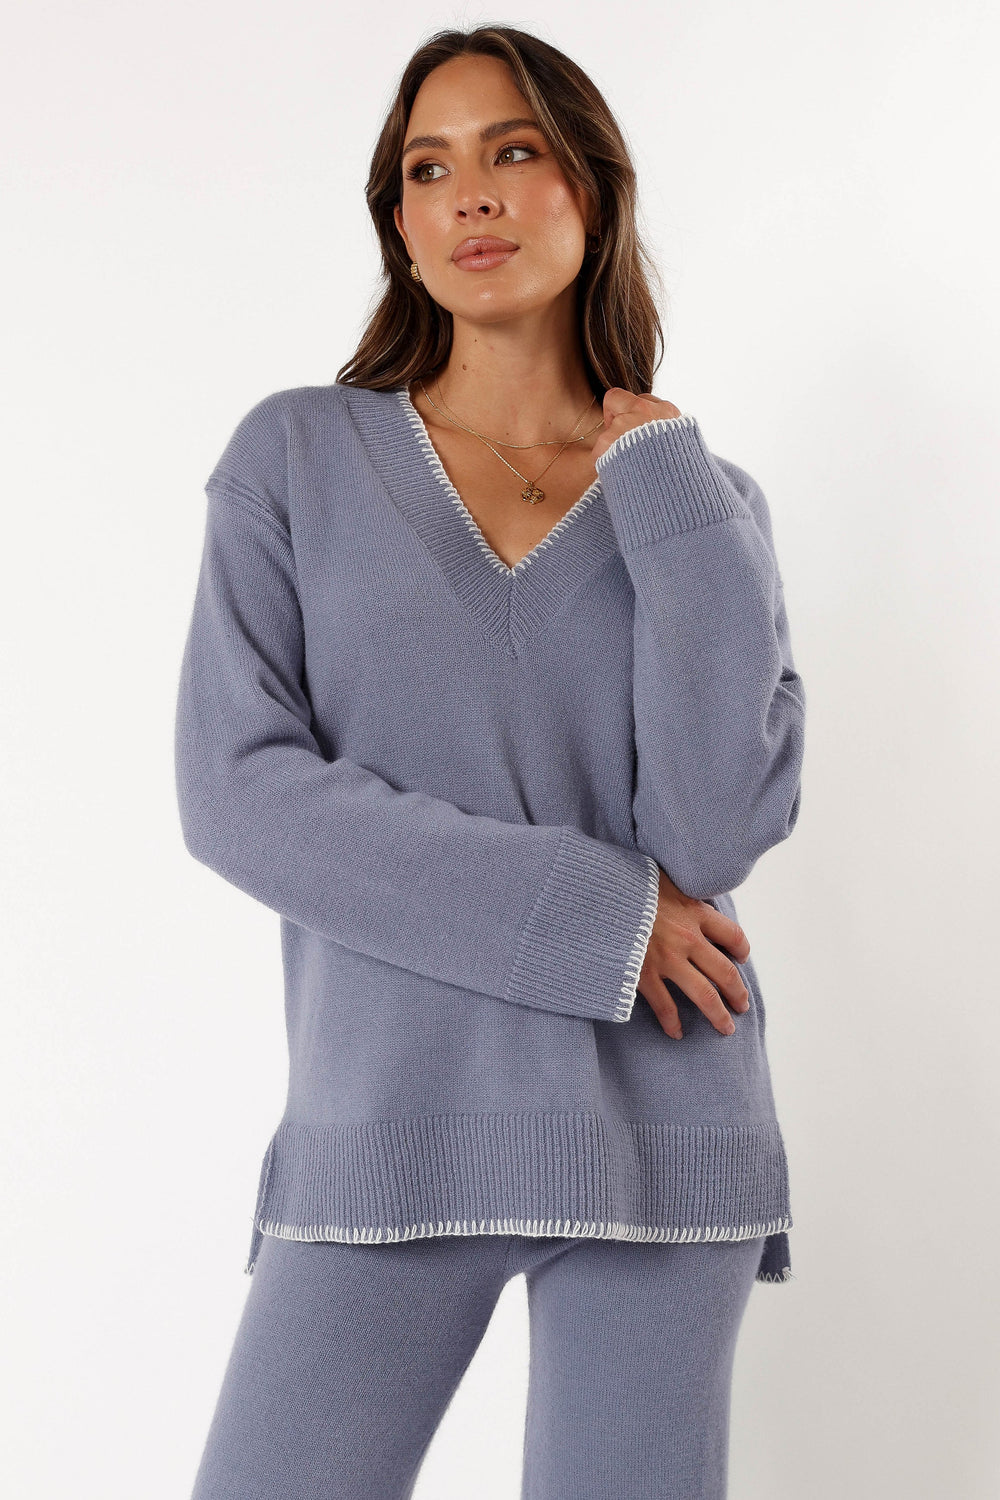 TOPS @Josslyn Sweater - Grey (Hold for Cool Beginnings)